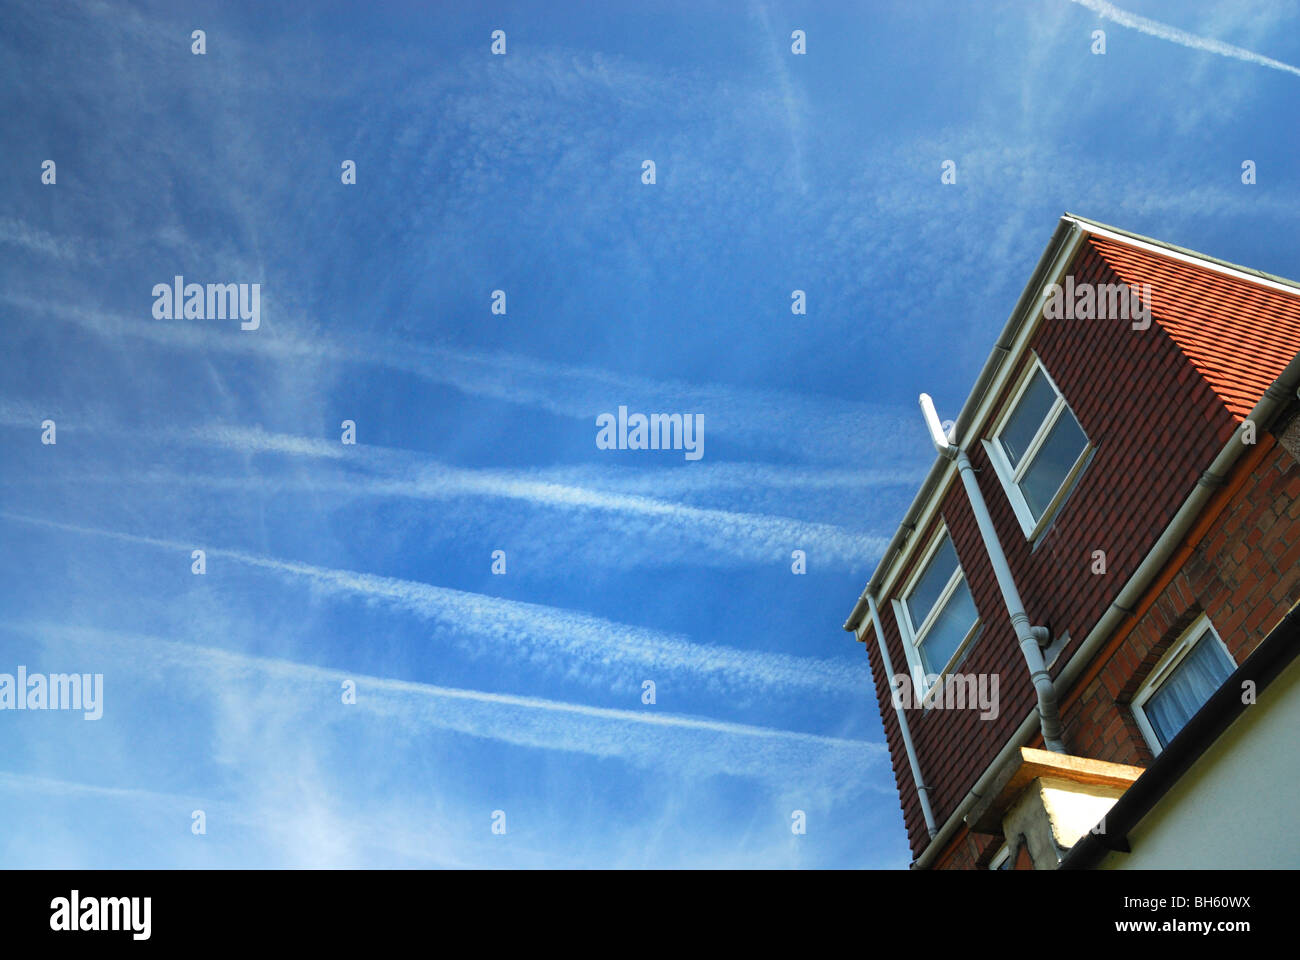 High altitude jet aircraft contrails filling the sky on a typical summer day in the UK Stock Photo